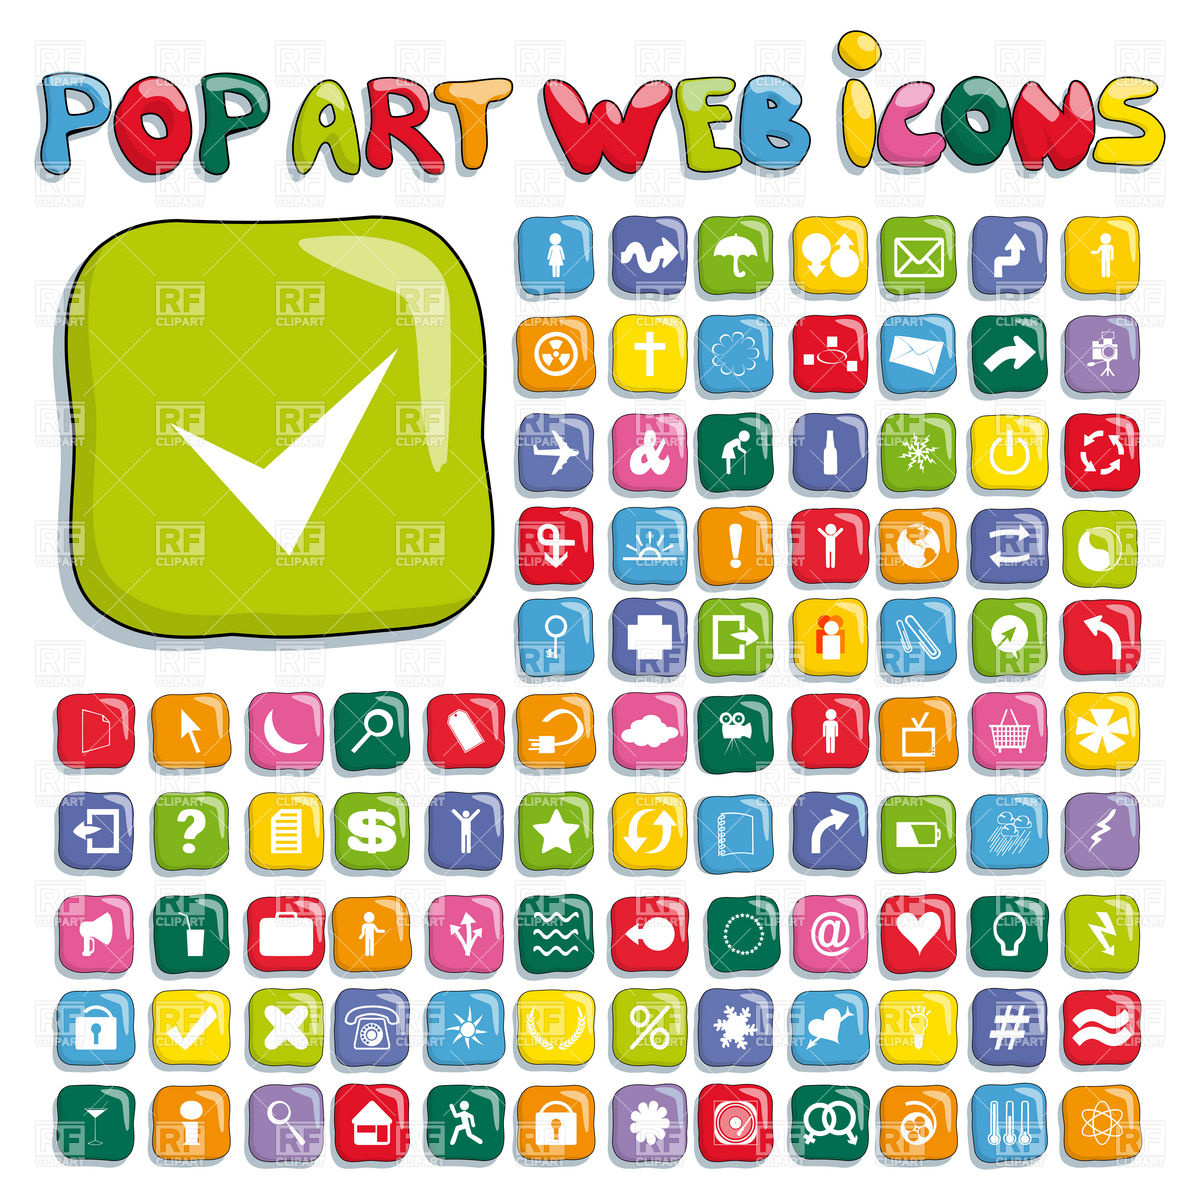 Stylized Pop Art Web Icon Set 6395 Icons And Emblems Download    